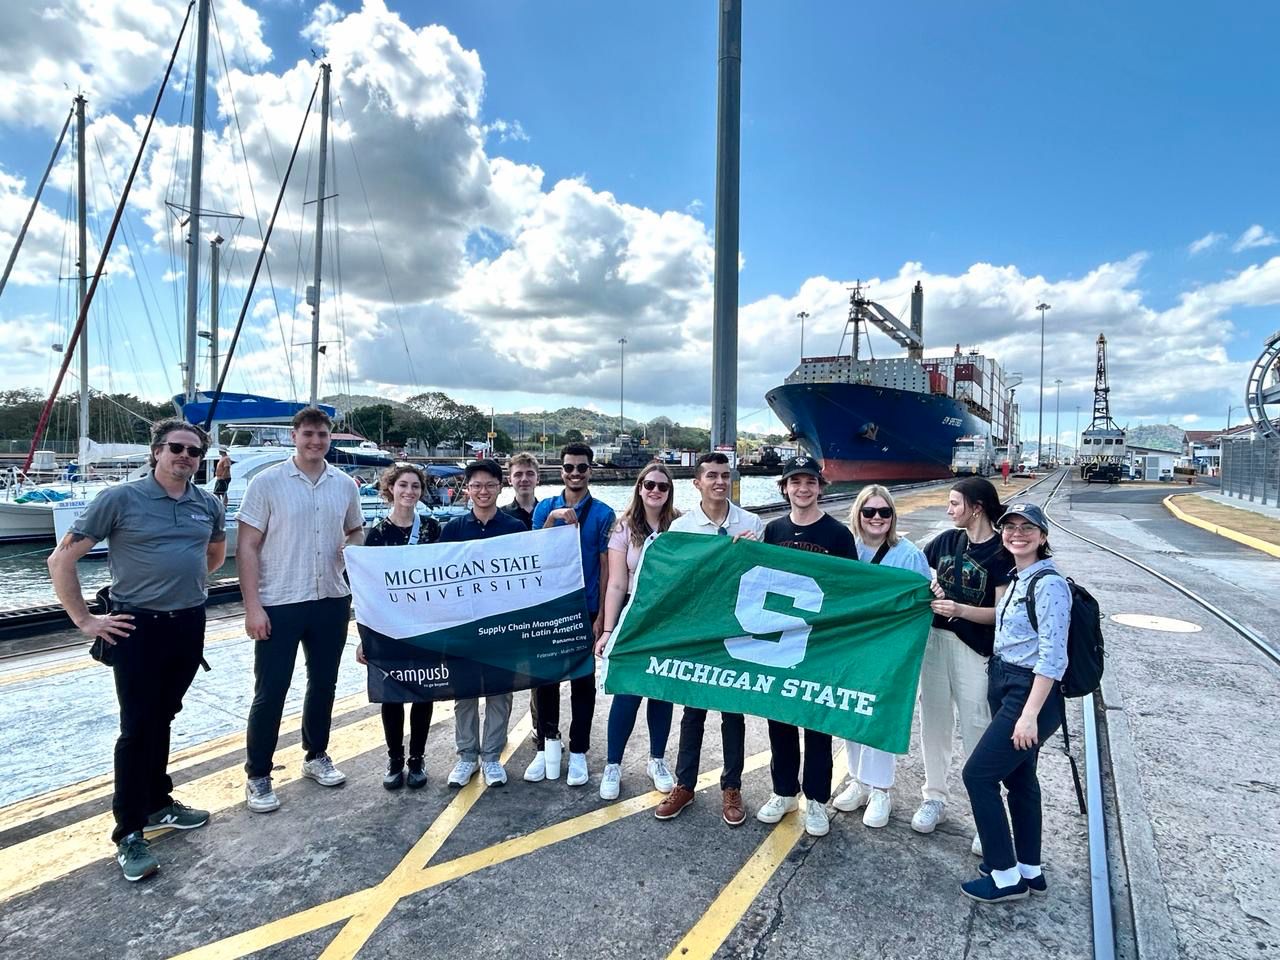 MSU students holding Spartan flags on the docks of the Panama Canal